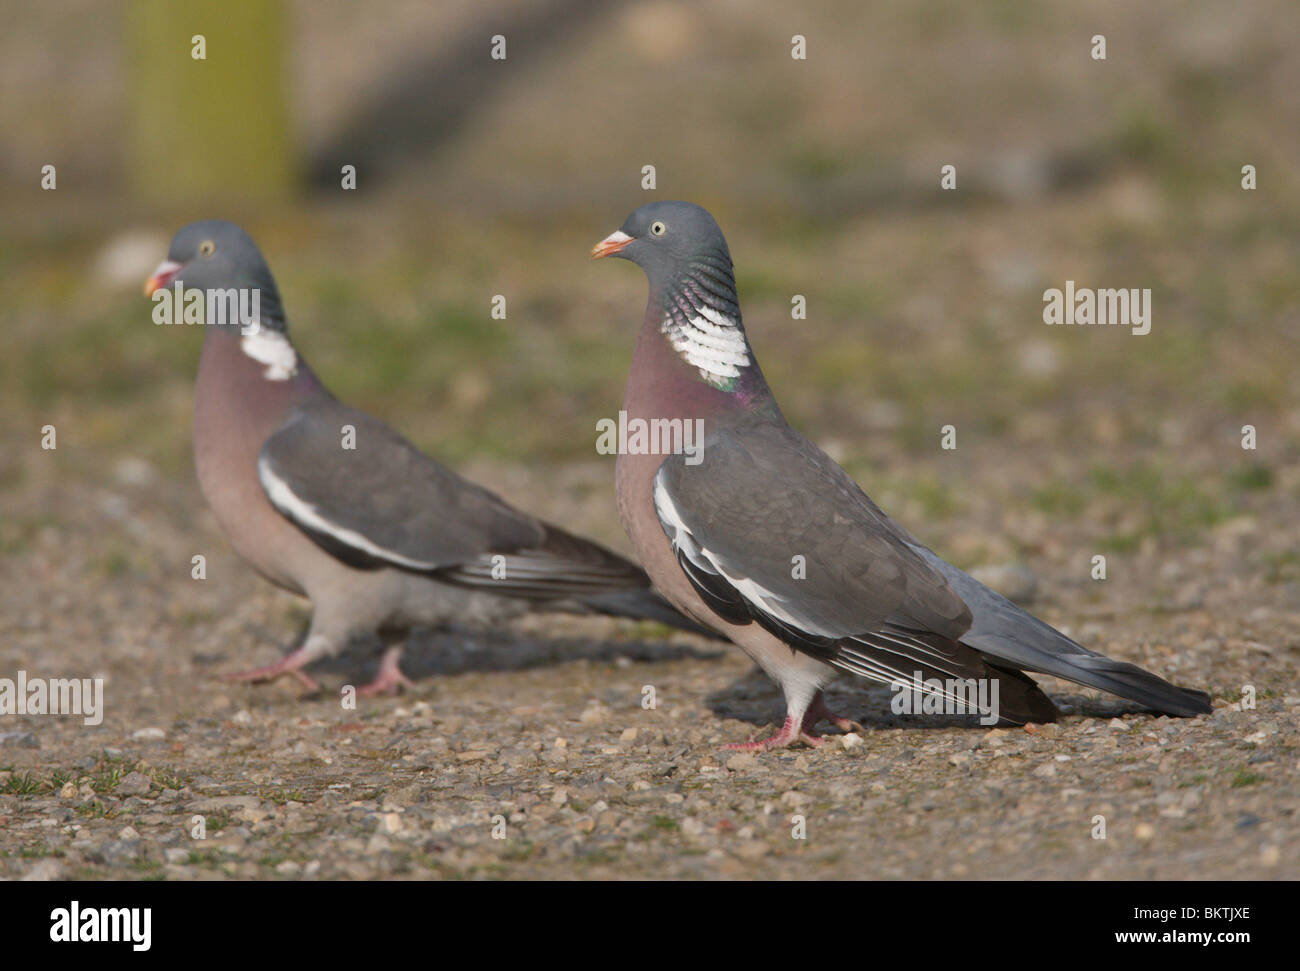 Paar Houtduif baltsend op de grond. Pair of Common Wood Pigeon displaying on the ground Stock Photo